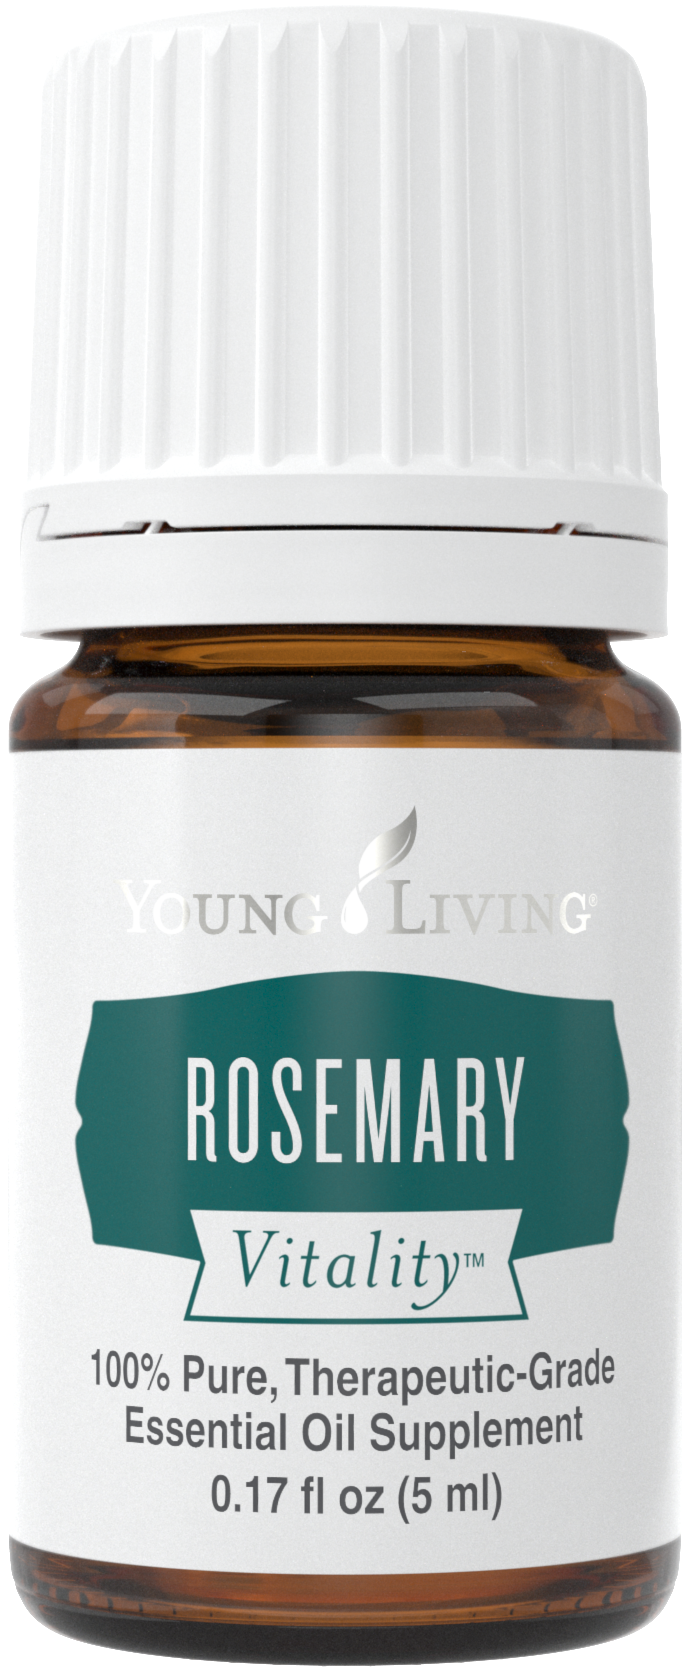 Rosemary Vitality Silo.png